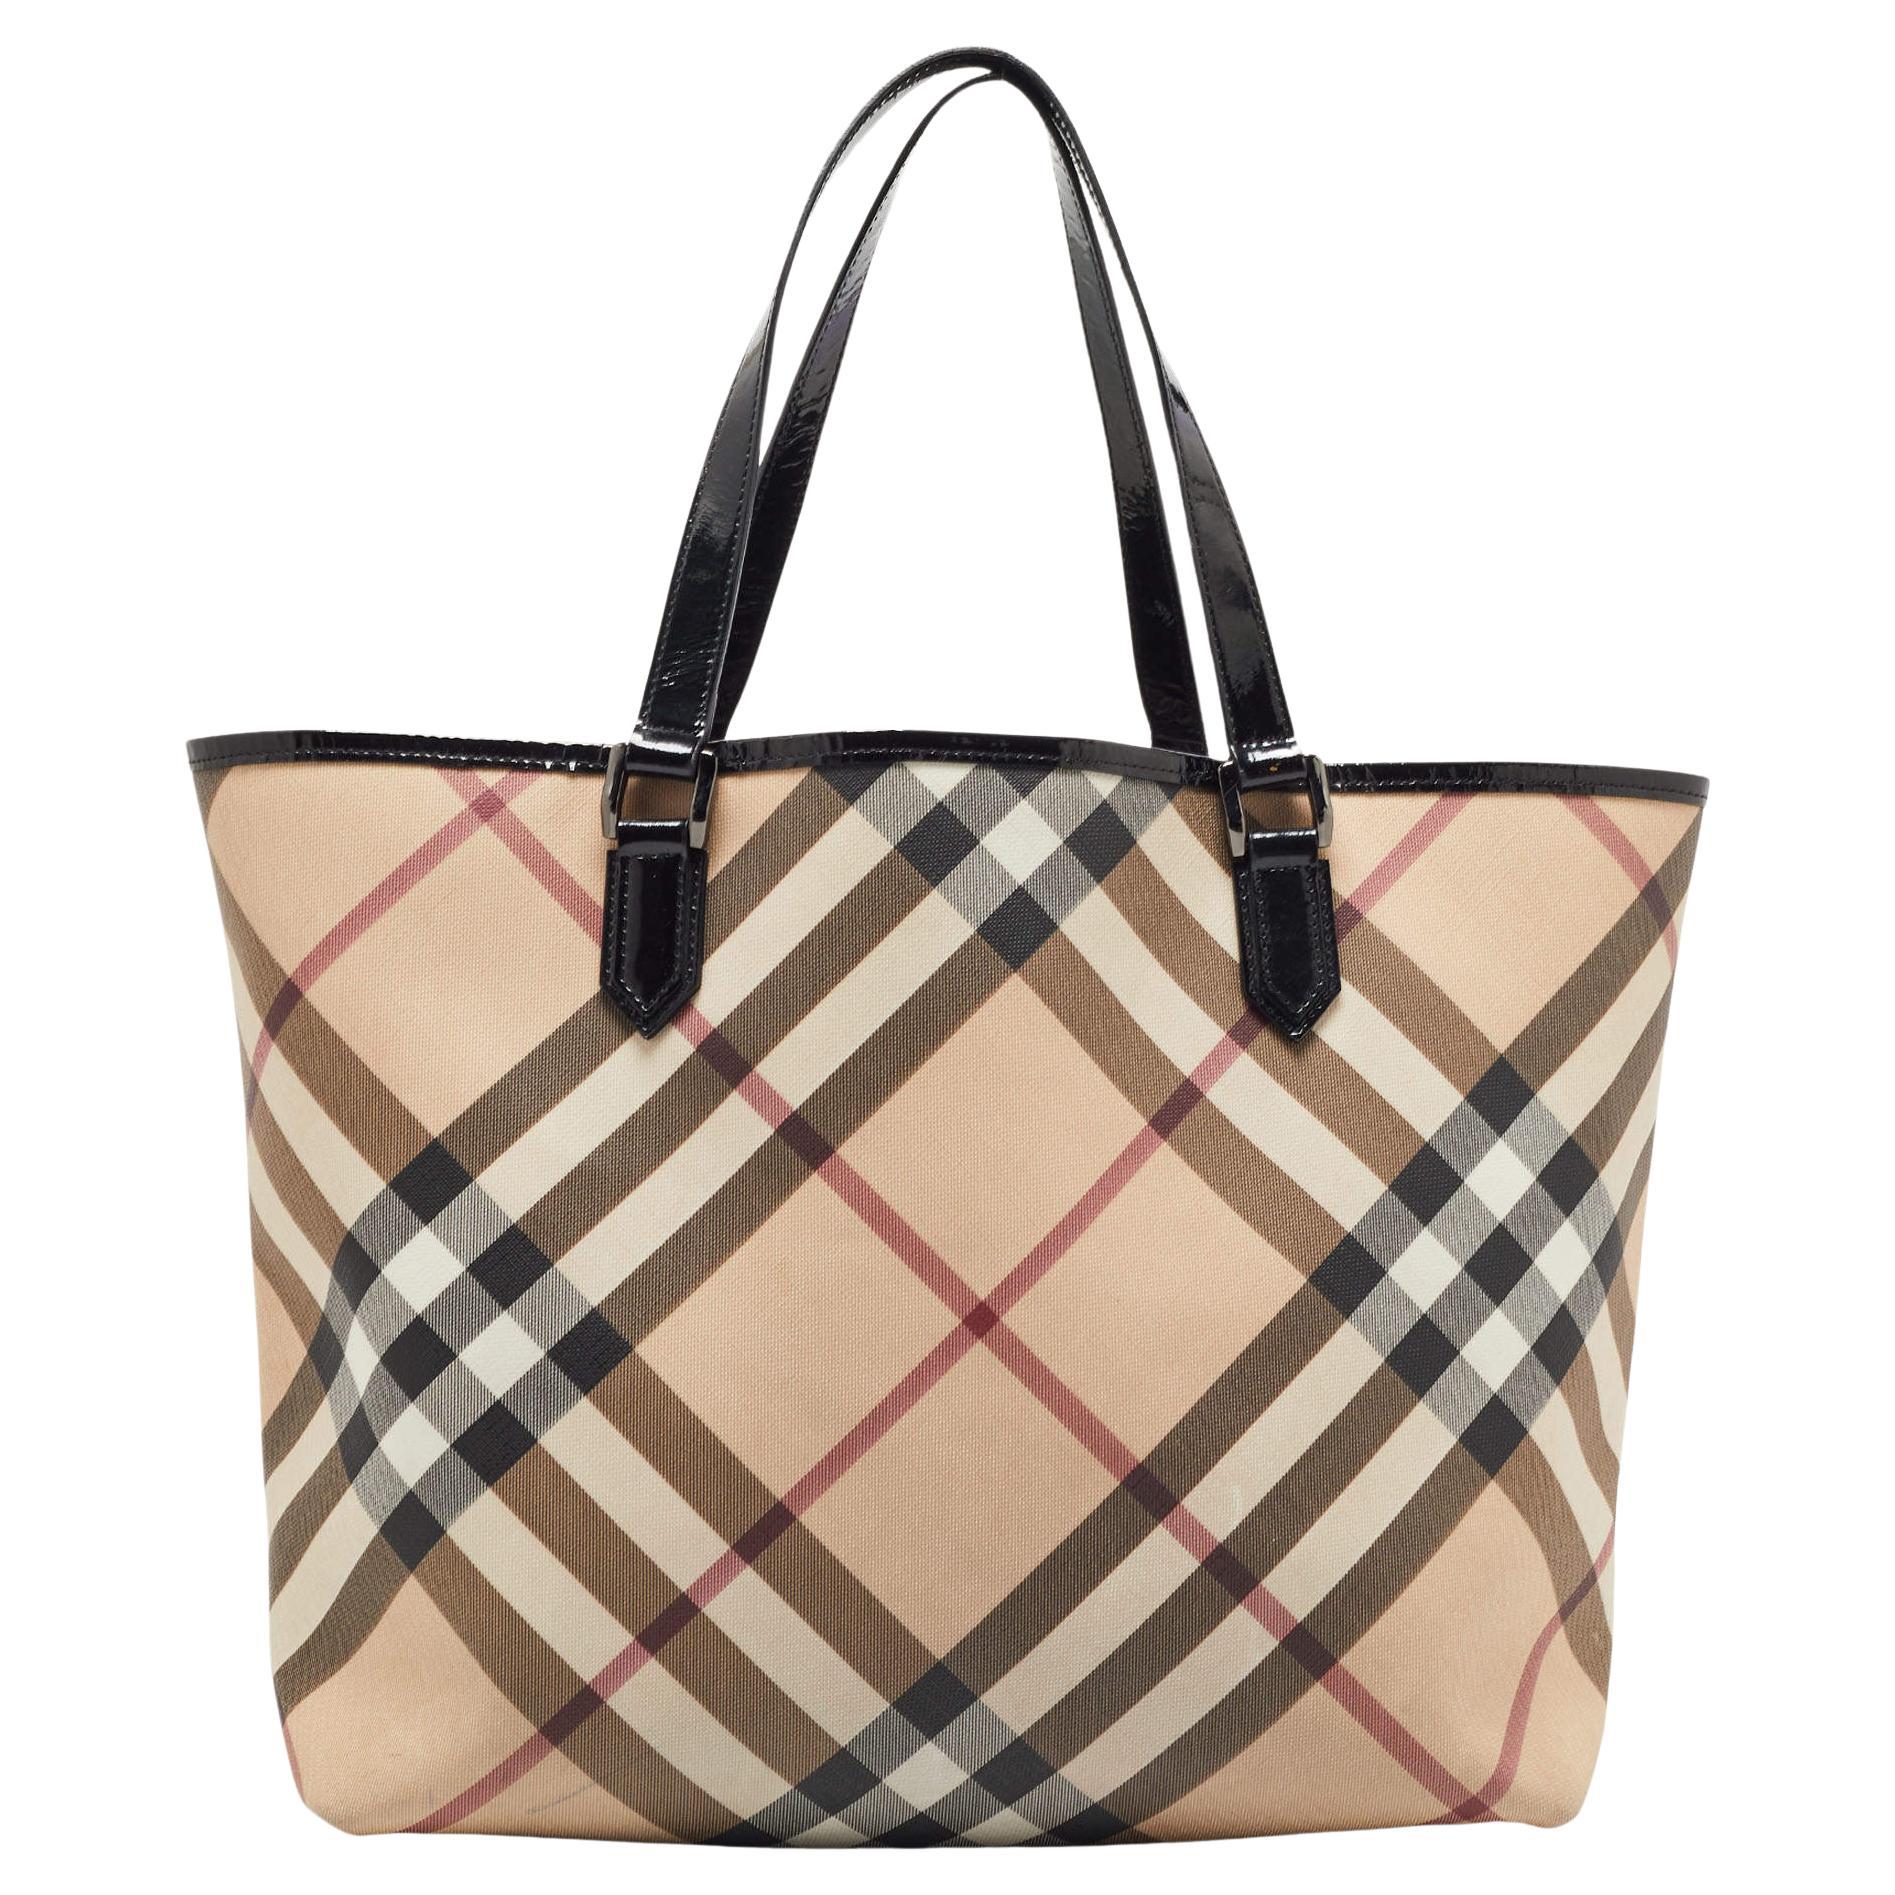 Burberry Black/Beige Super Nova Check PVC and Patent Leather Large Nickie Tote